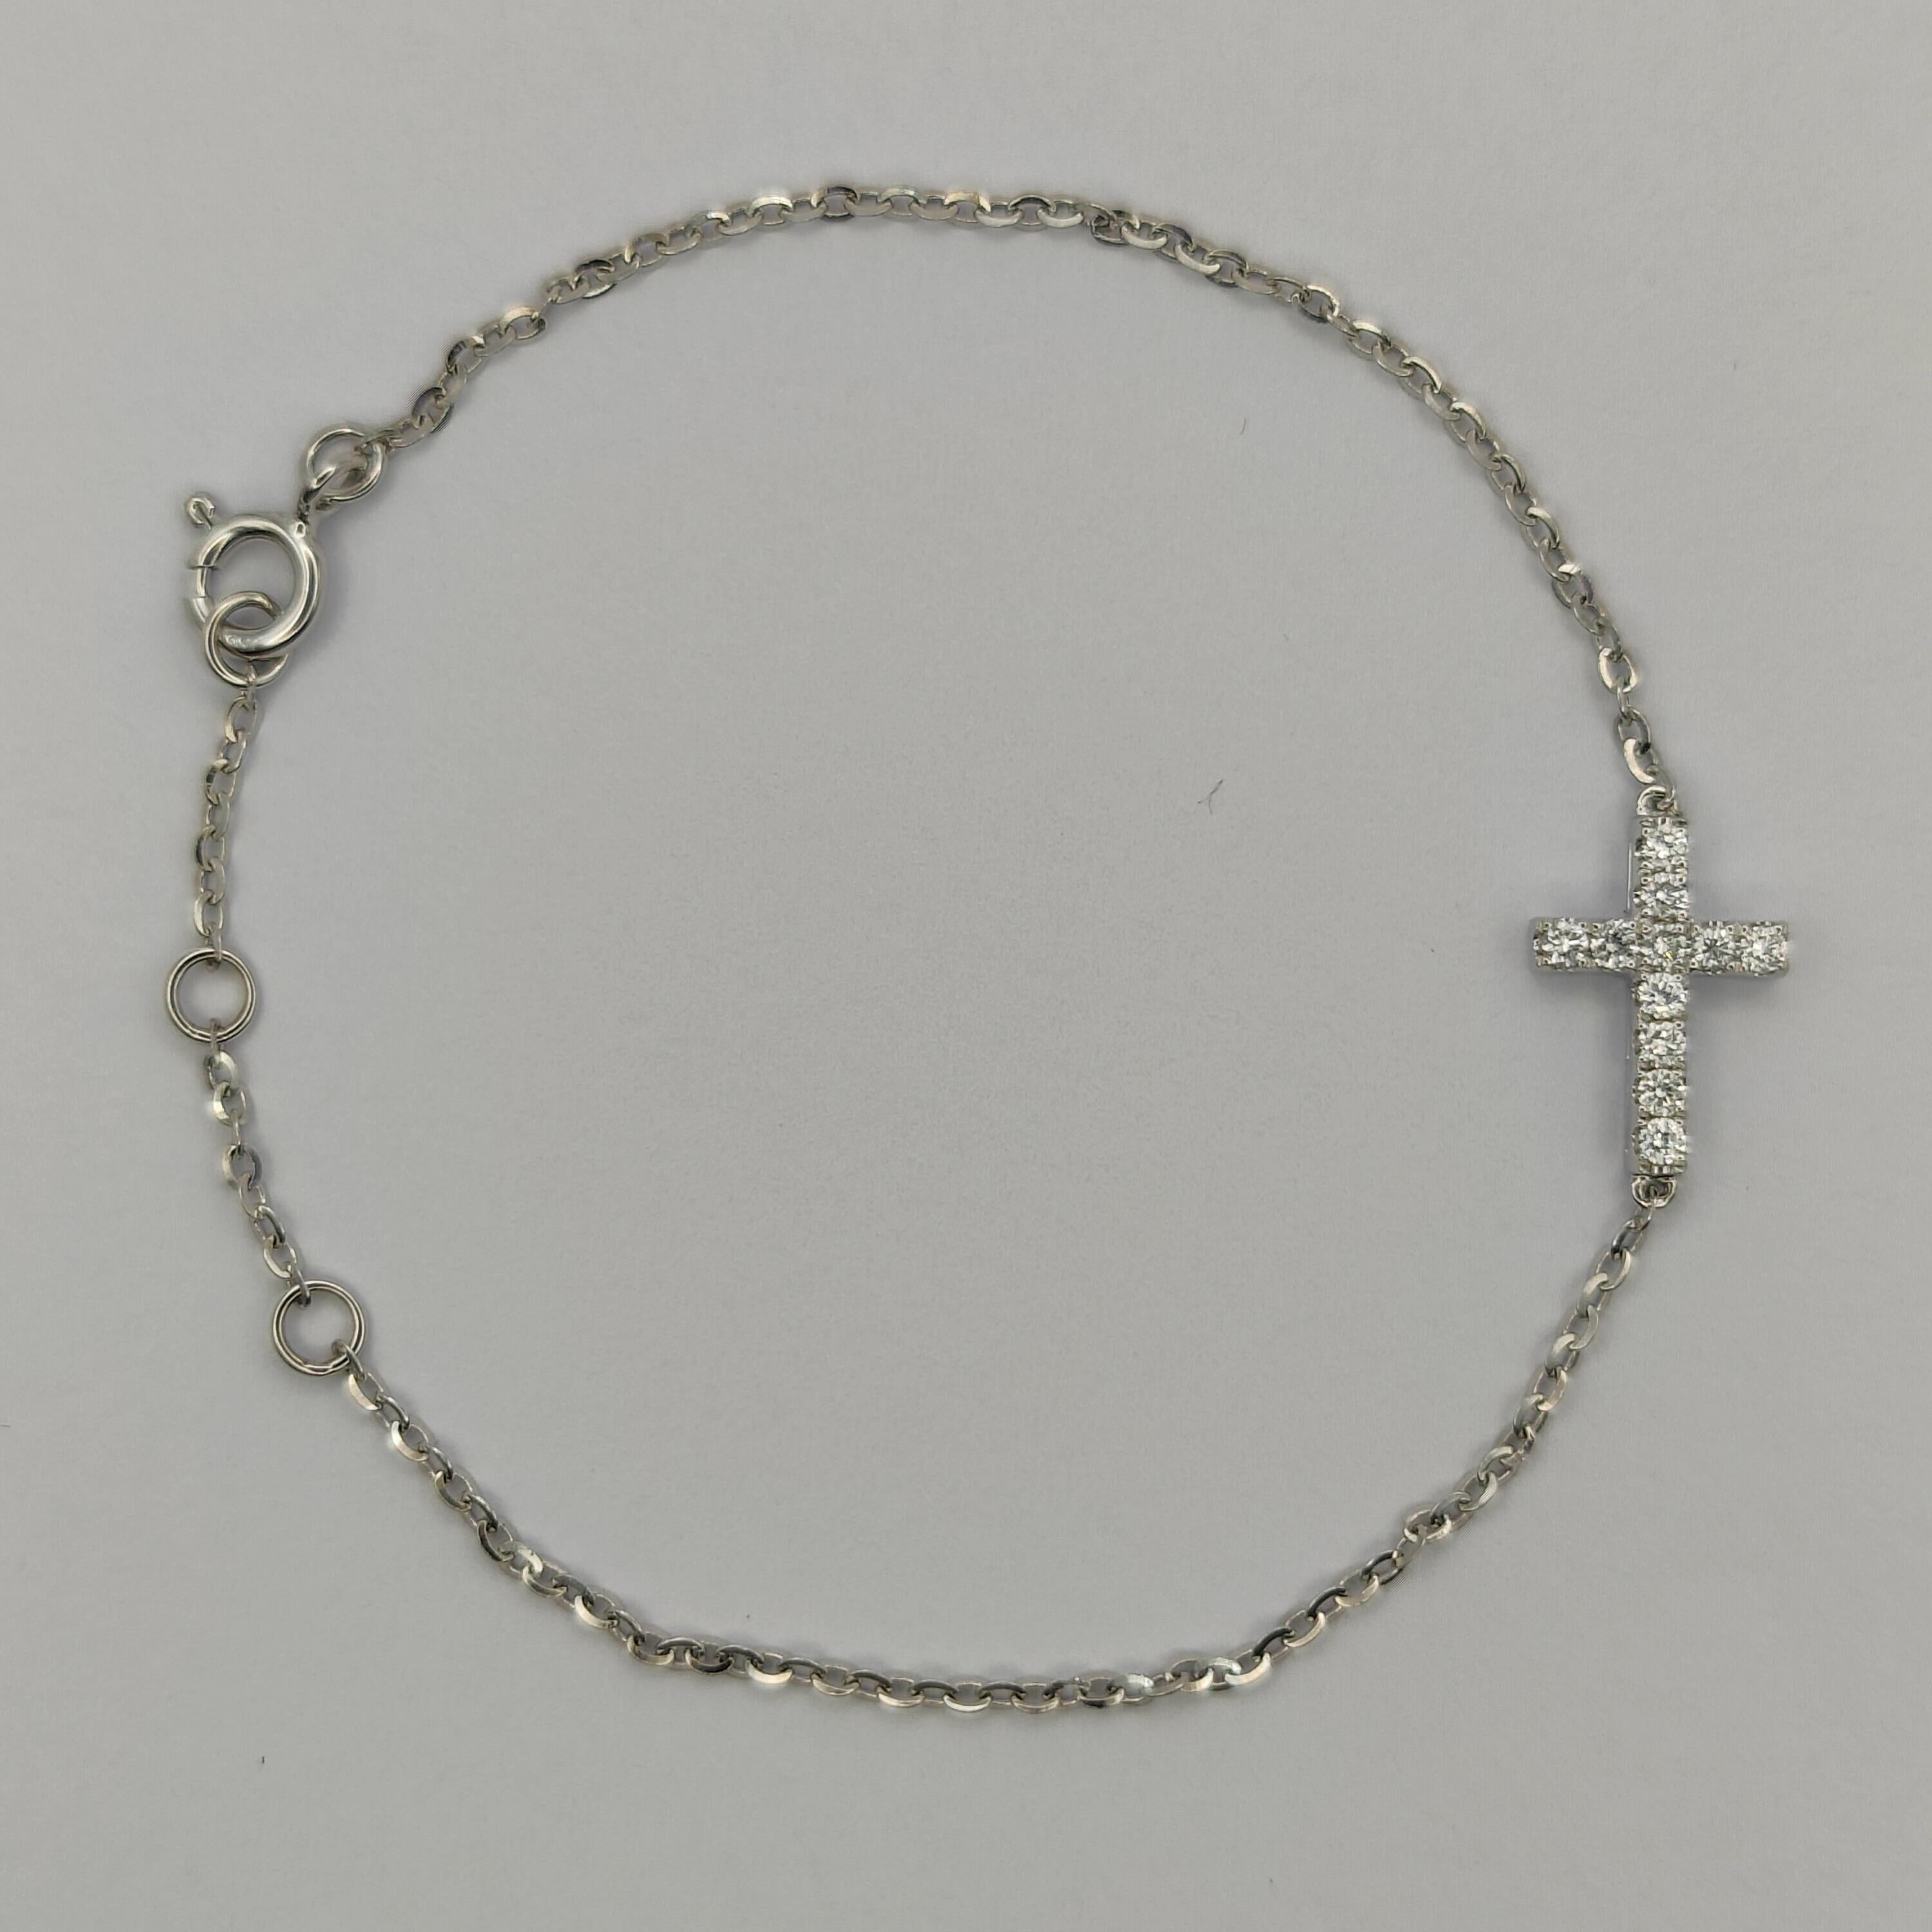 This beautiful diamond bracelet features a delicate white gold chain adorned with a sparkling diamond cross pendant. The bracelet is made of 18k white gold, giving it a timeless and elegant appearance. The pendant is set with 11 high-quality round